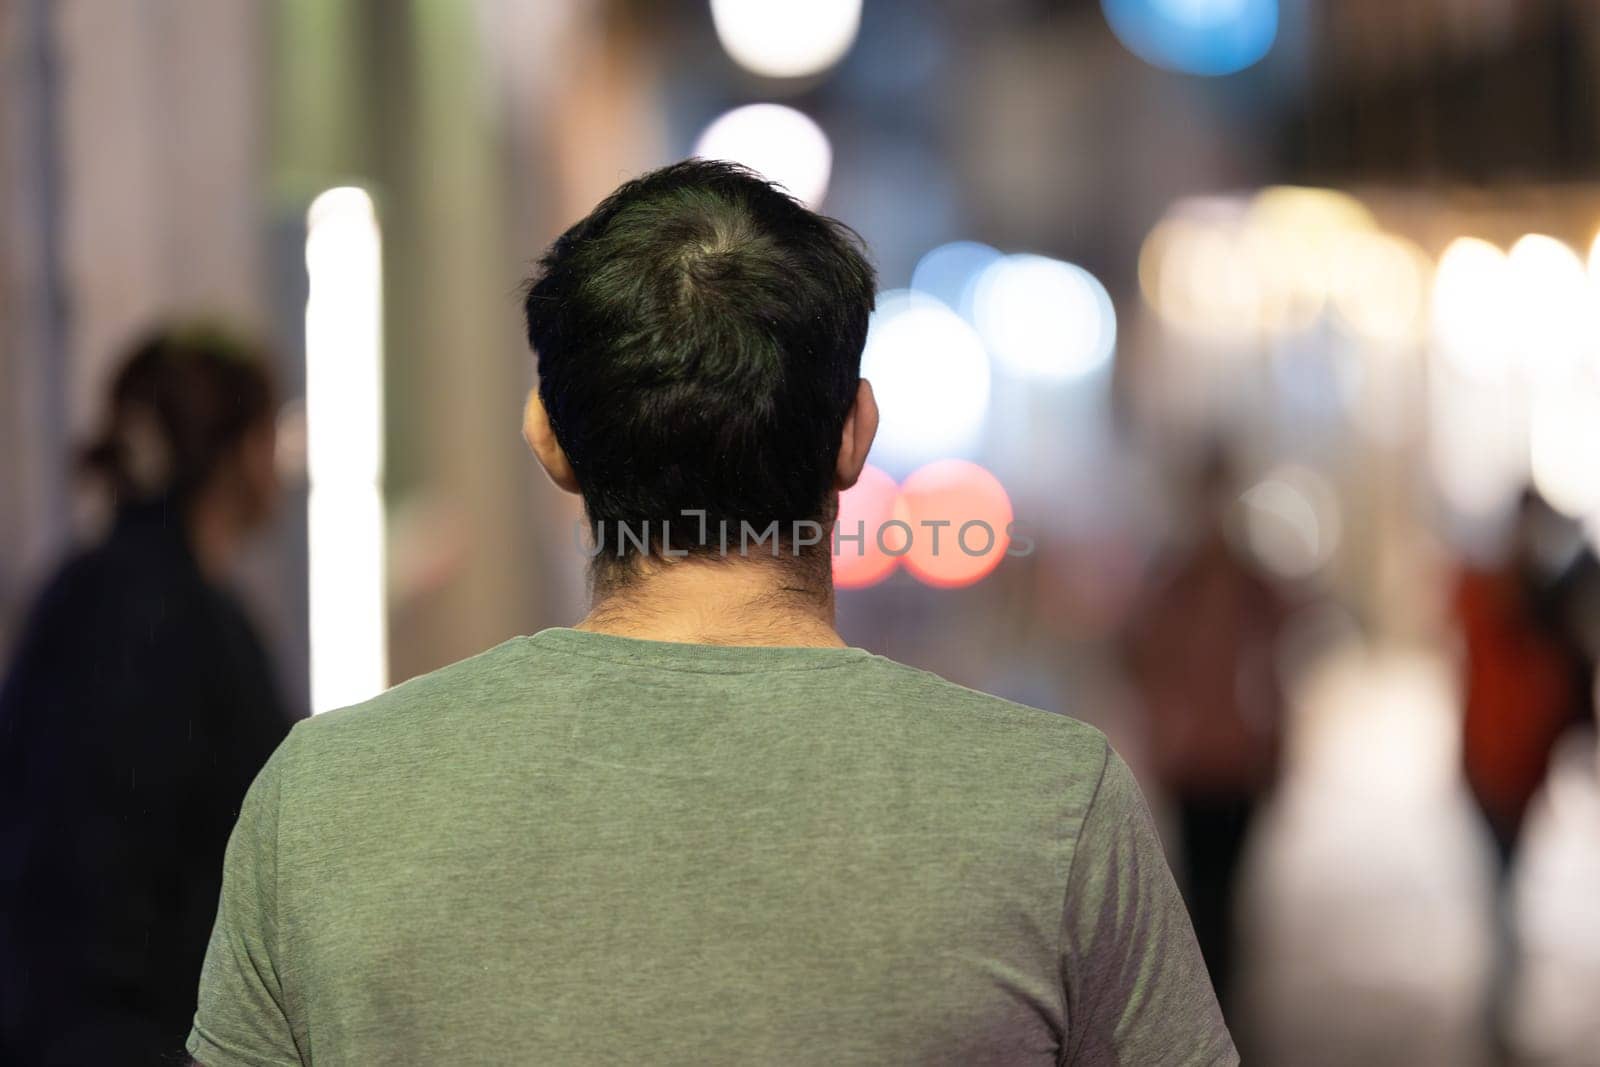 A man is seen walking alone, surrounded by the vibrant night lights of the city.